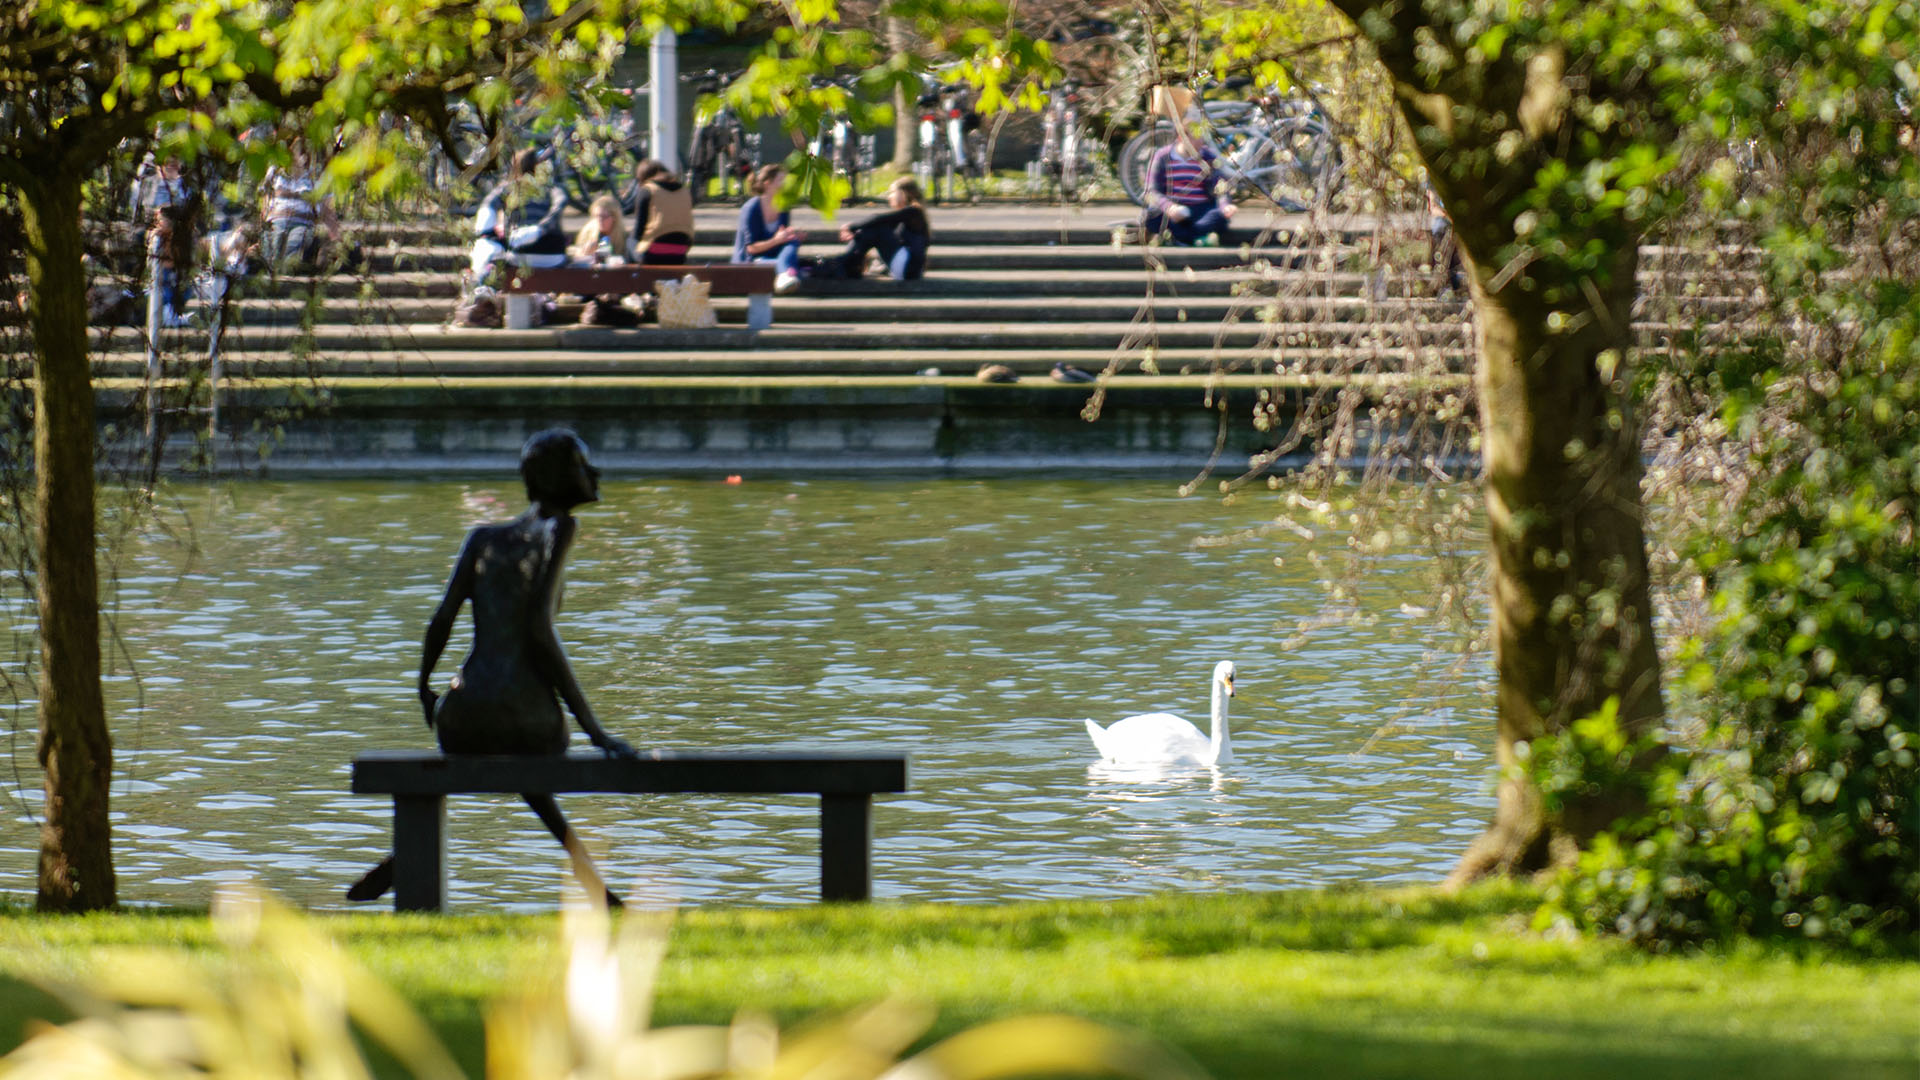 A sculpture by the UCD lake on a Summer's day